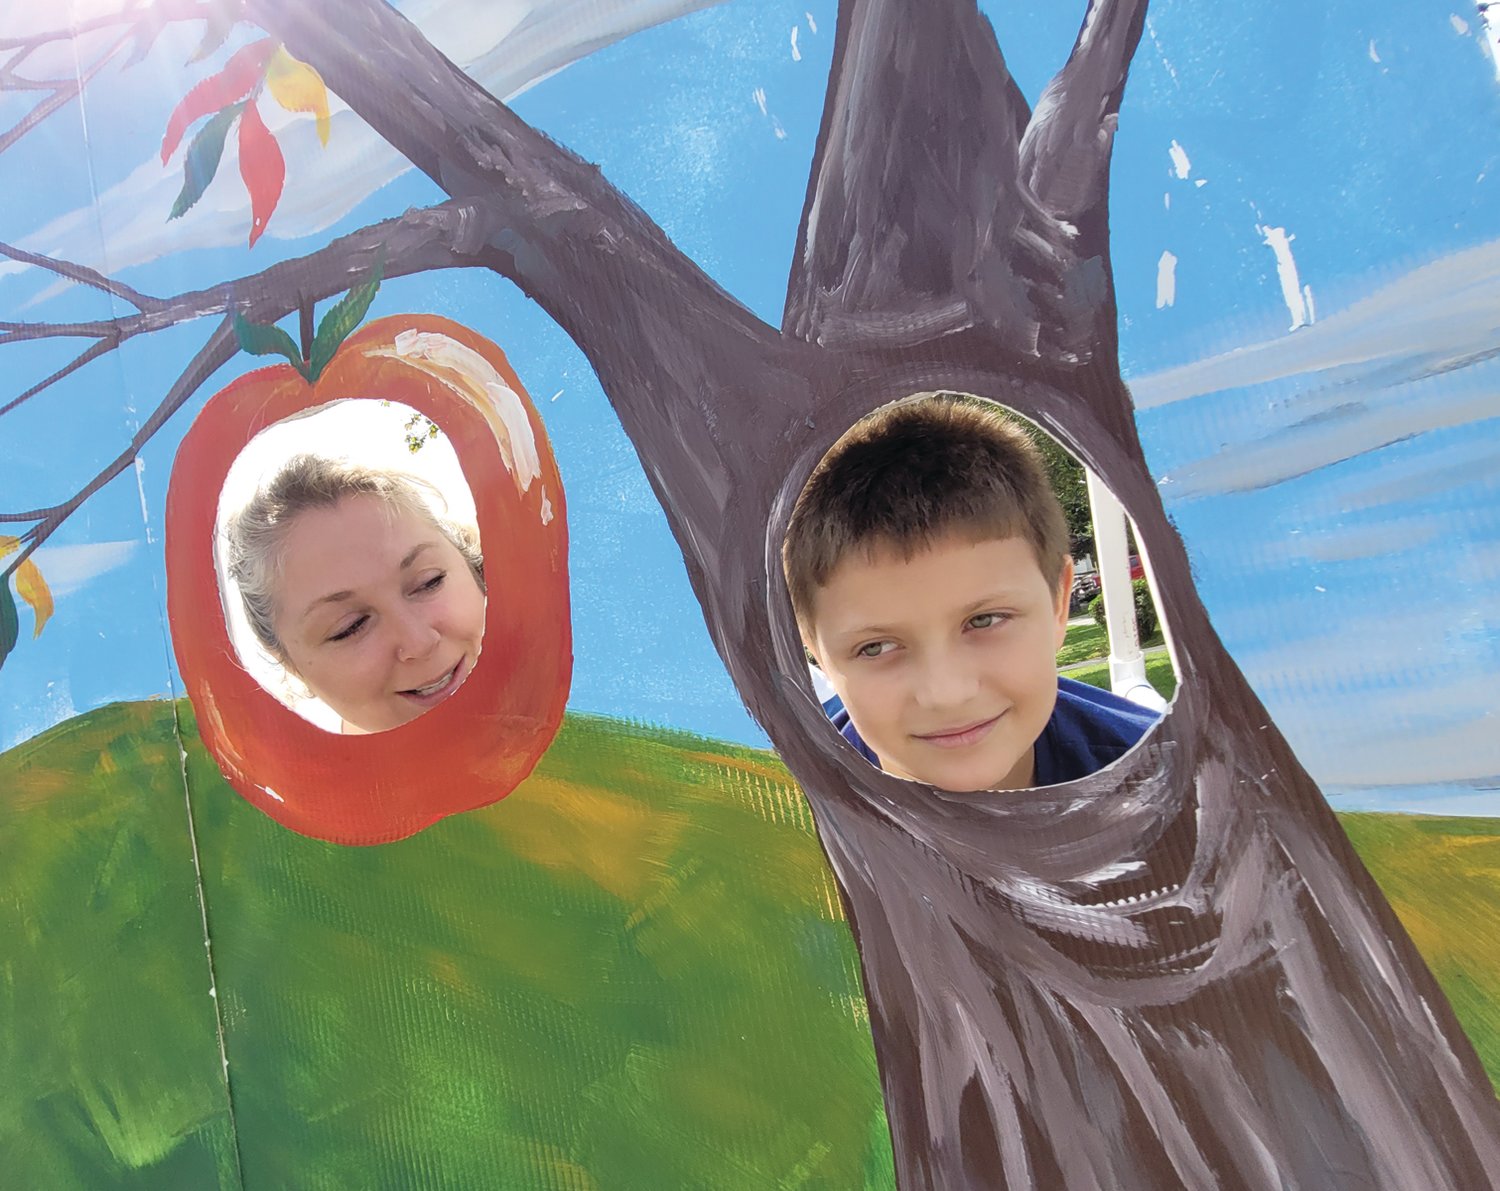 APPLE HEADS: Boston Wood posed with Katelin Fasciano, poking their heads through a cutout for photos at the Apple Festival last Saturday.